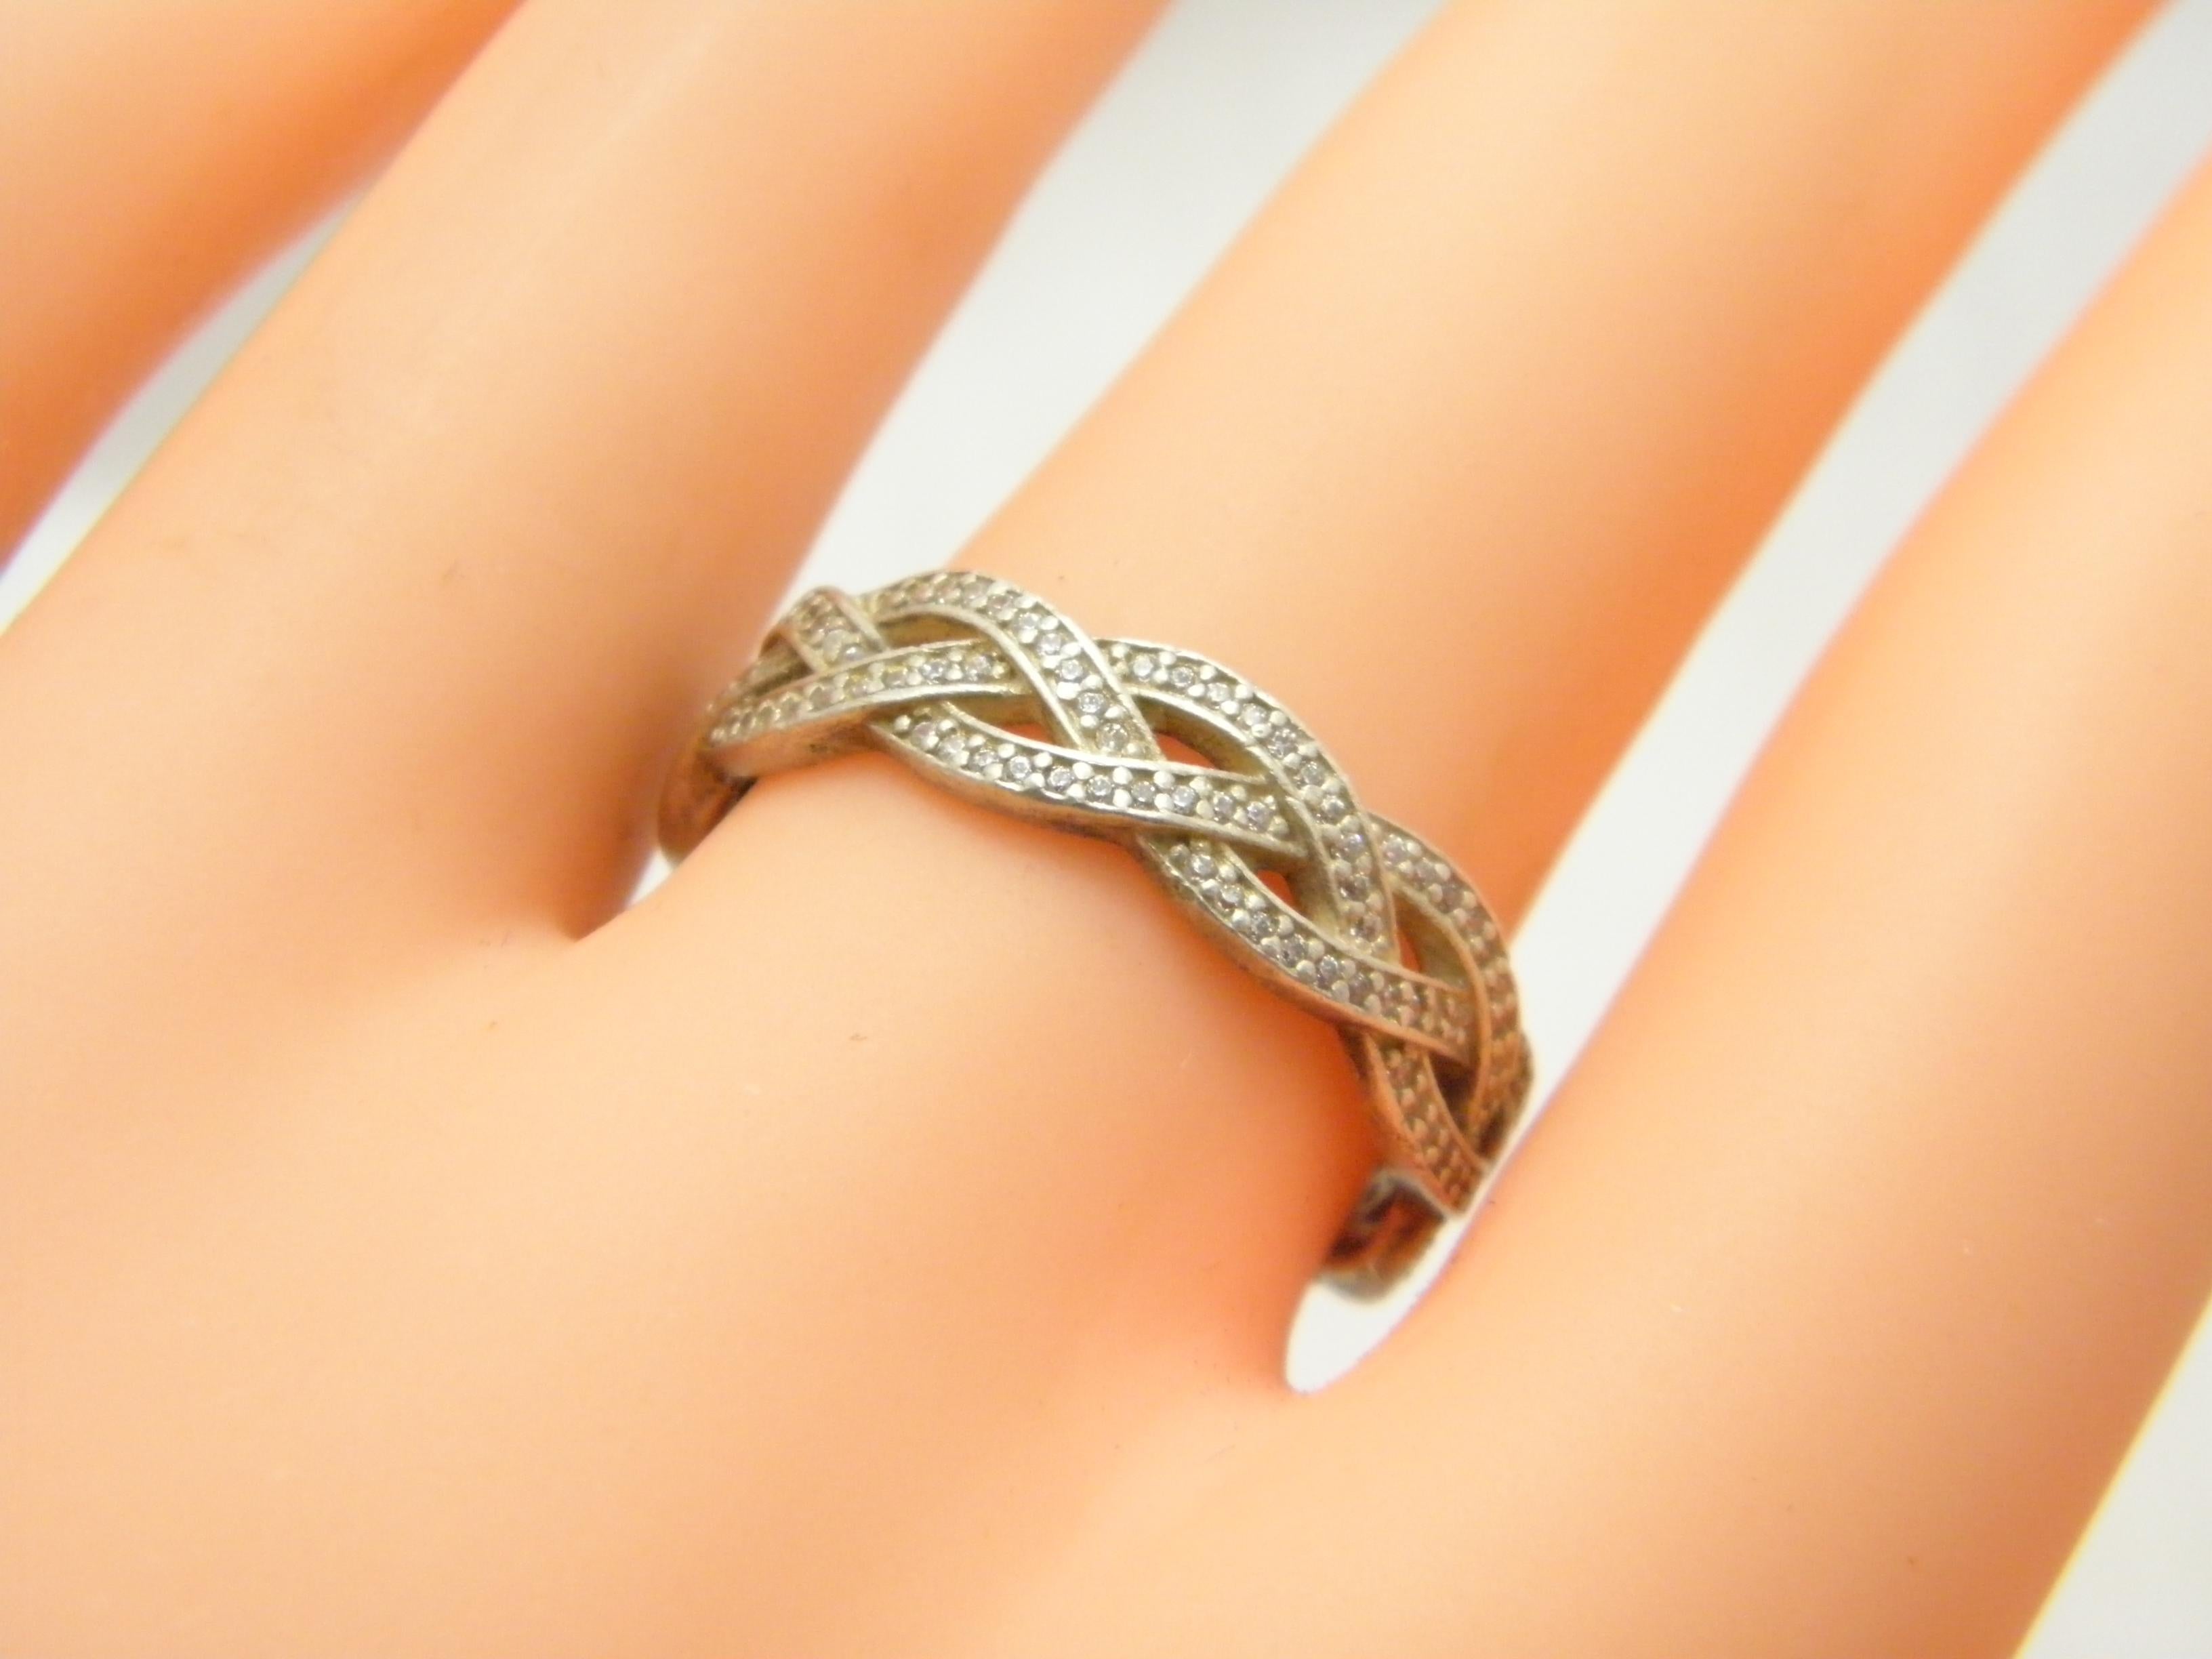 Vintage Palladium Diamond 6mm Celtic Weave Ring Size S 9.25 950 Purity Band For Sale 1